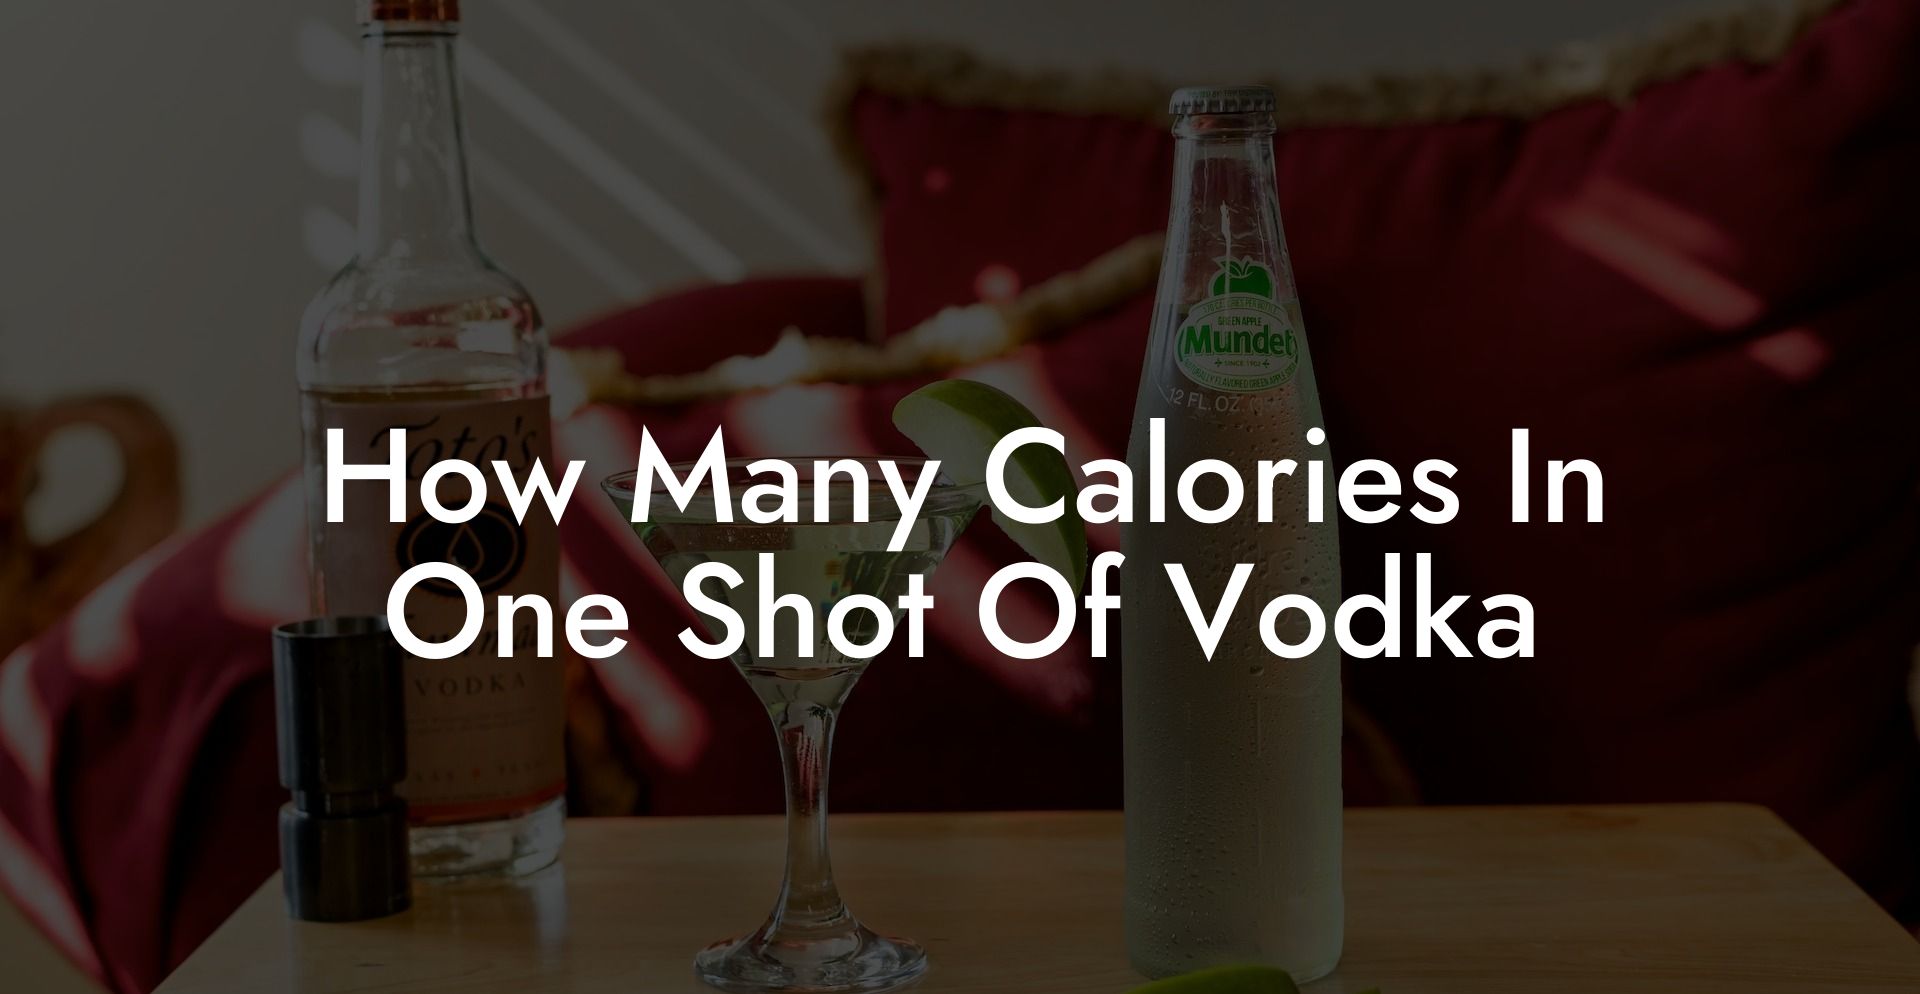 How Many Calories In One Shot Of Vodka